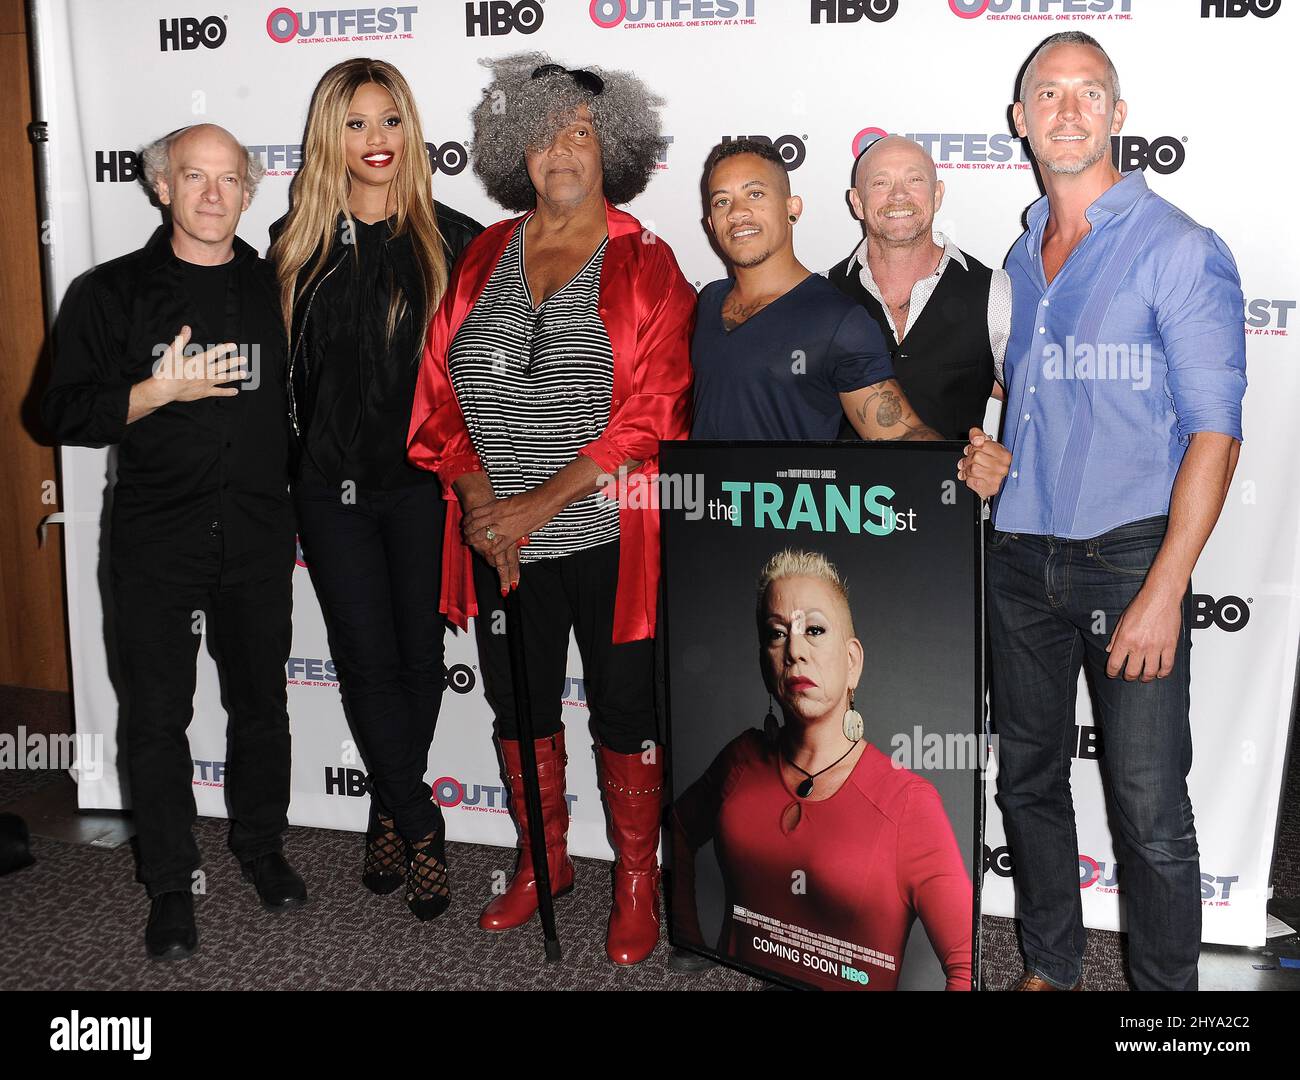 Laverne Cox, Buck Angel, Miss Major, Shane Ortega attending the 2016 Outfest Los Angeles LGBT Film Festival Screening of 'The Trans List' held at Directors Guild of America in Los Angeles, California. Stock Photo